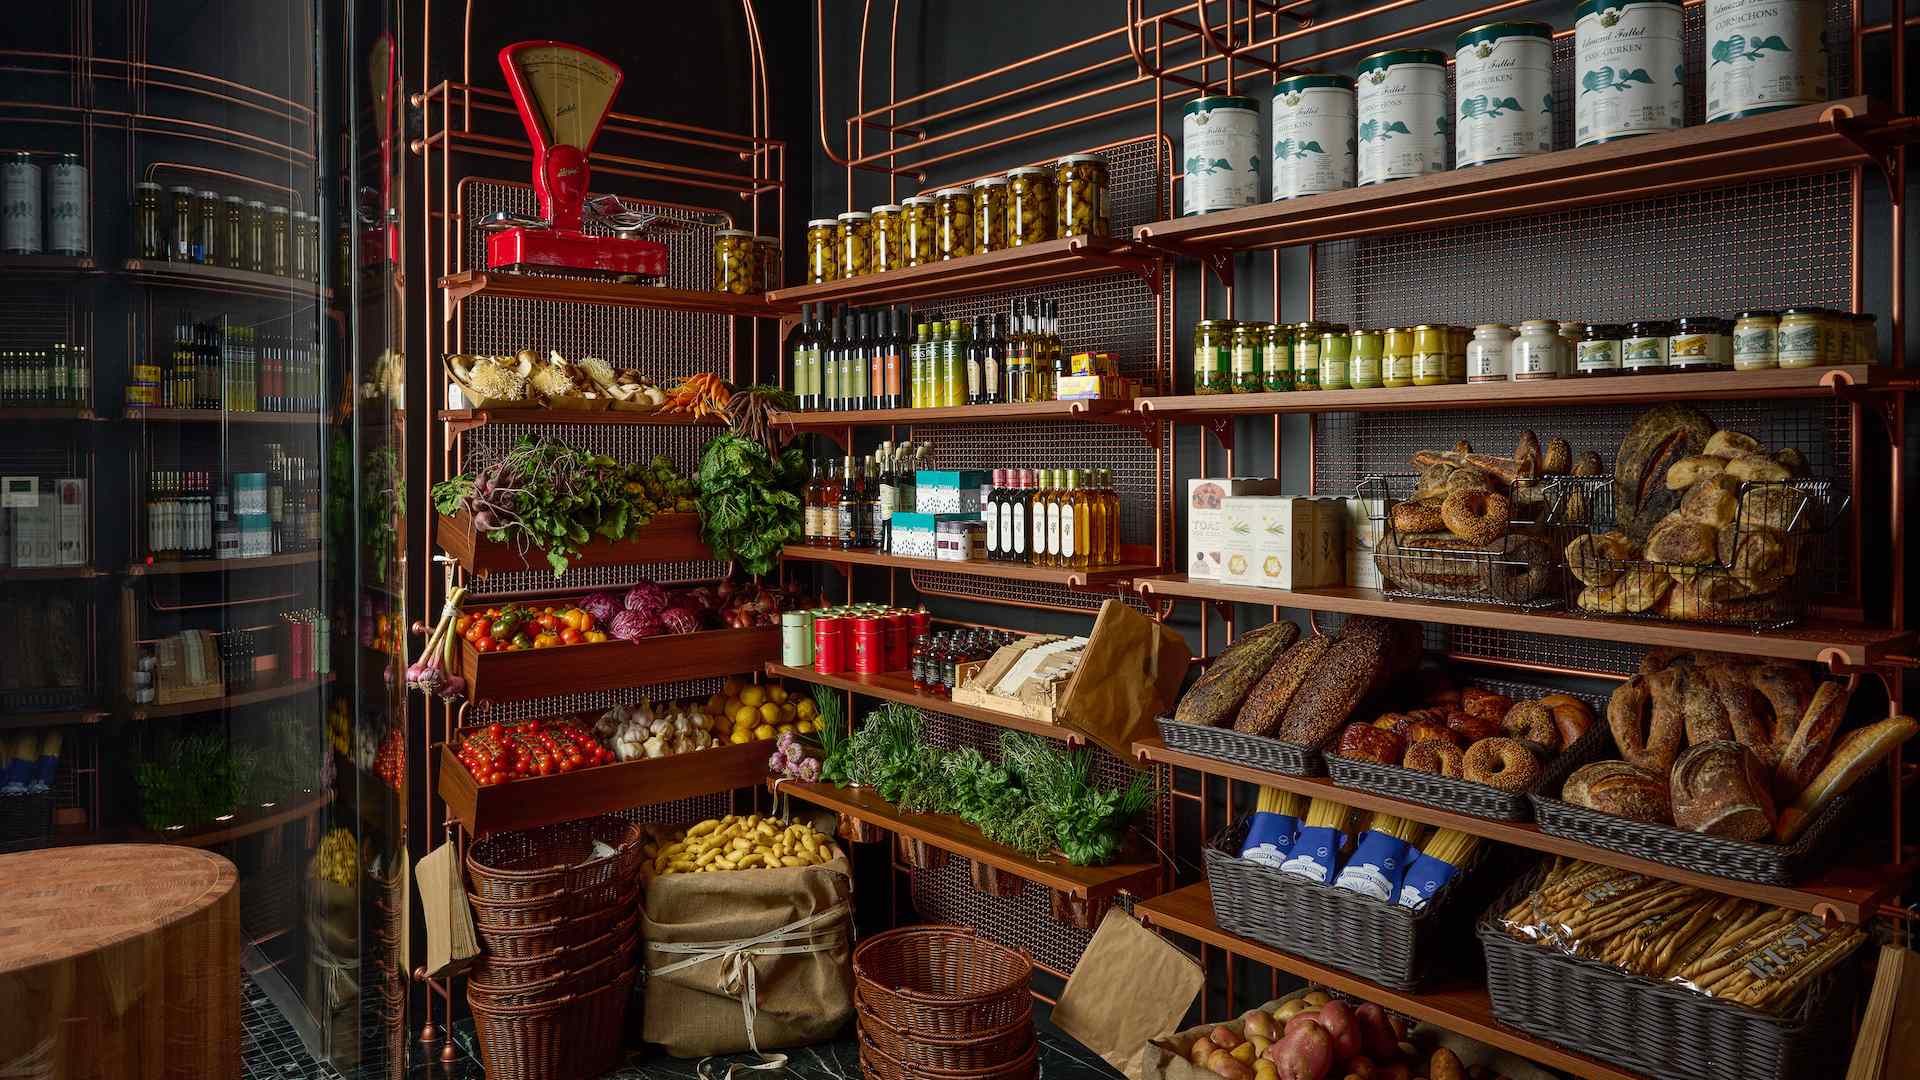 Sydney Butcher Victor Churchill Has Opened a New Melbourne Shop Complete with a Wine Bar and Charcuterie Counter